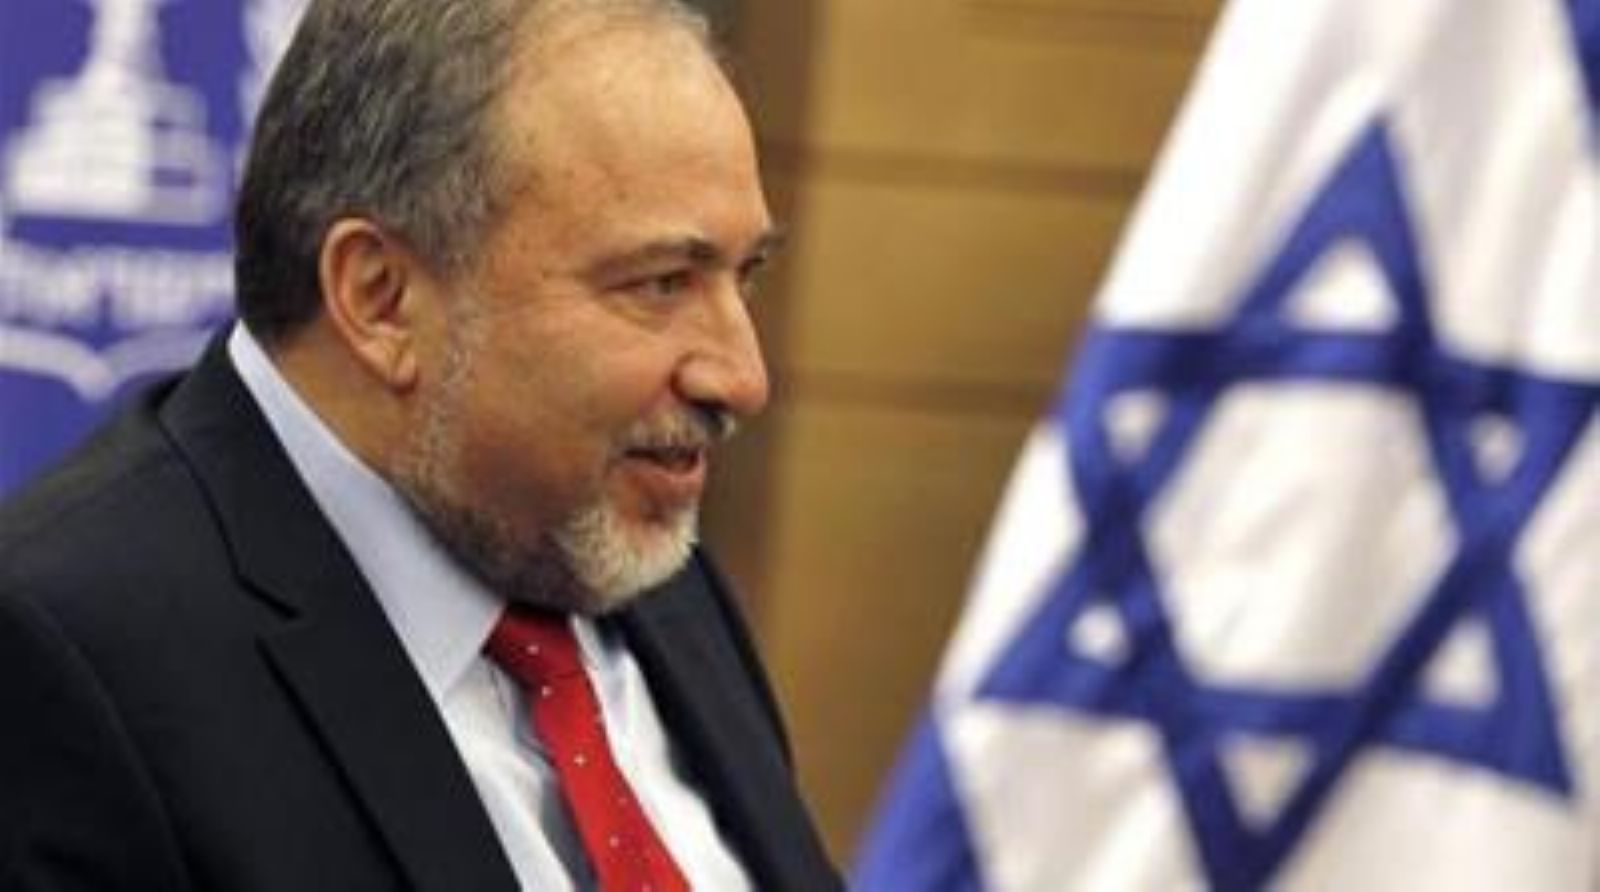 New powers for Israels security minister will harm Arab citizens